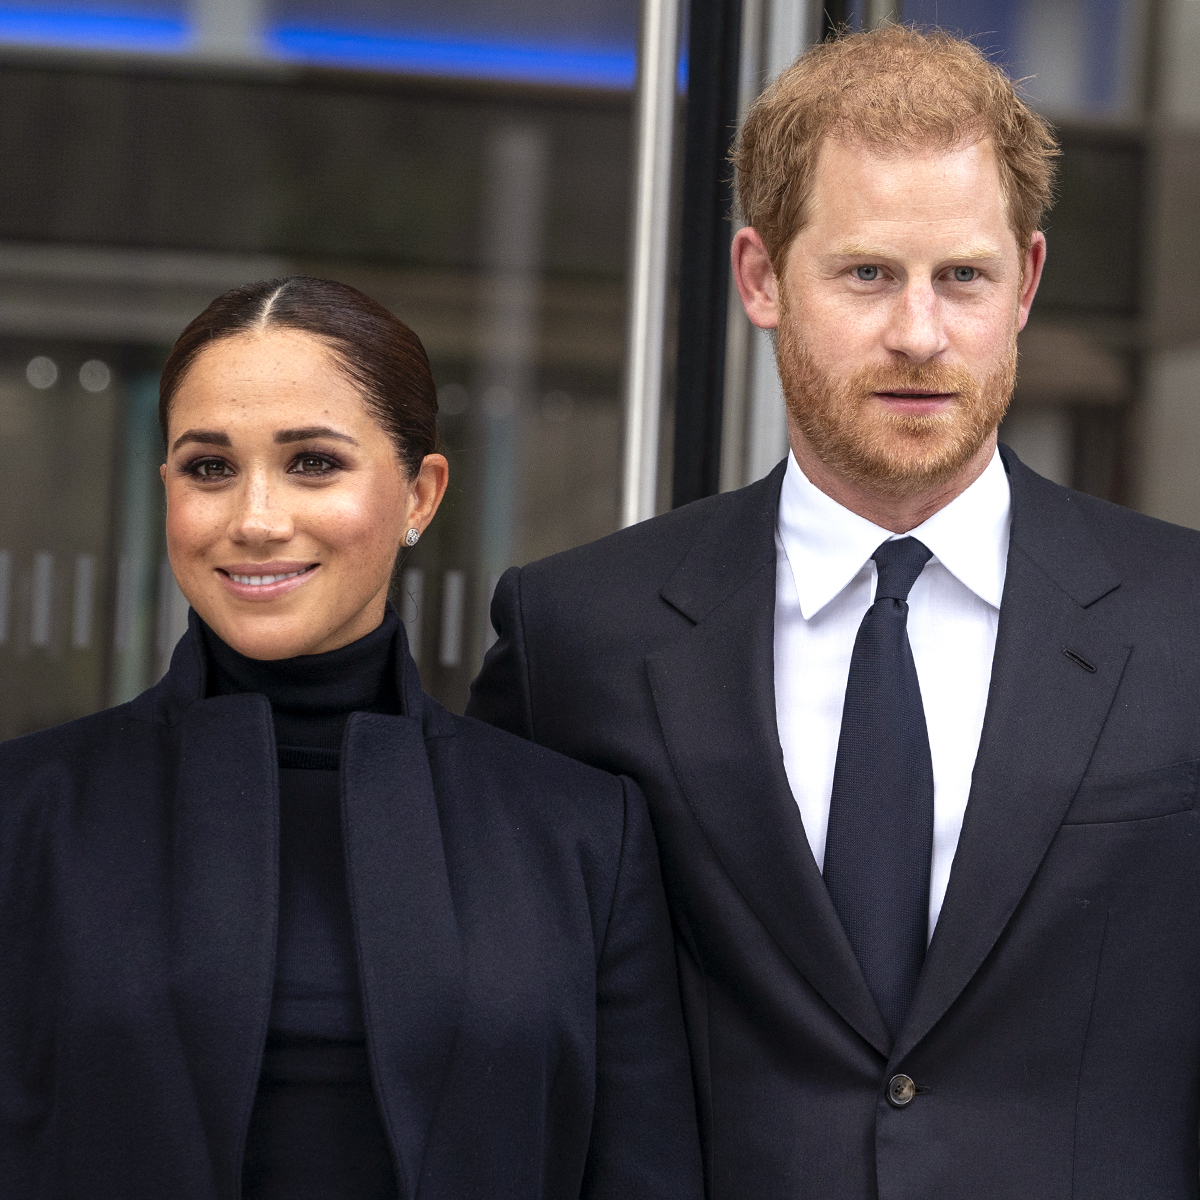 Prince Harry Recalls Being “Terrified” for Meghan Markle in New Docuseries Trailer – E! Online